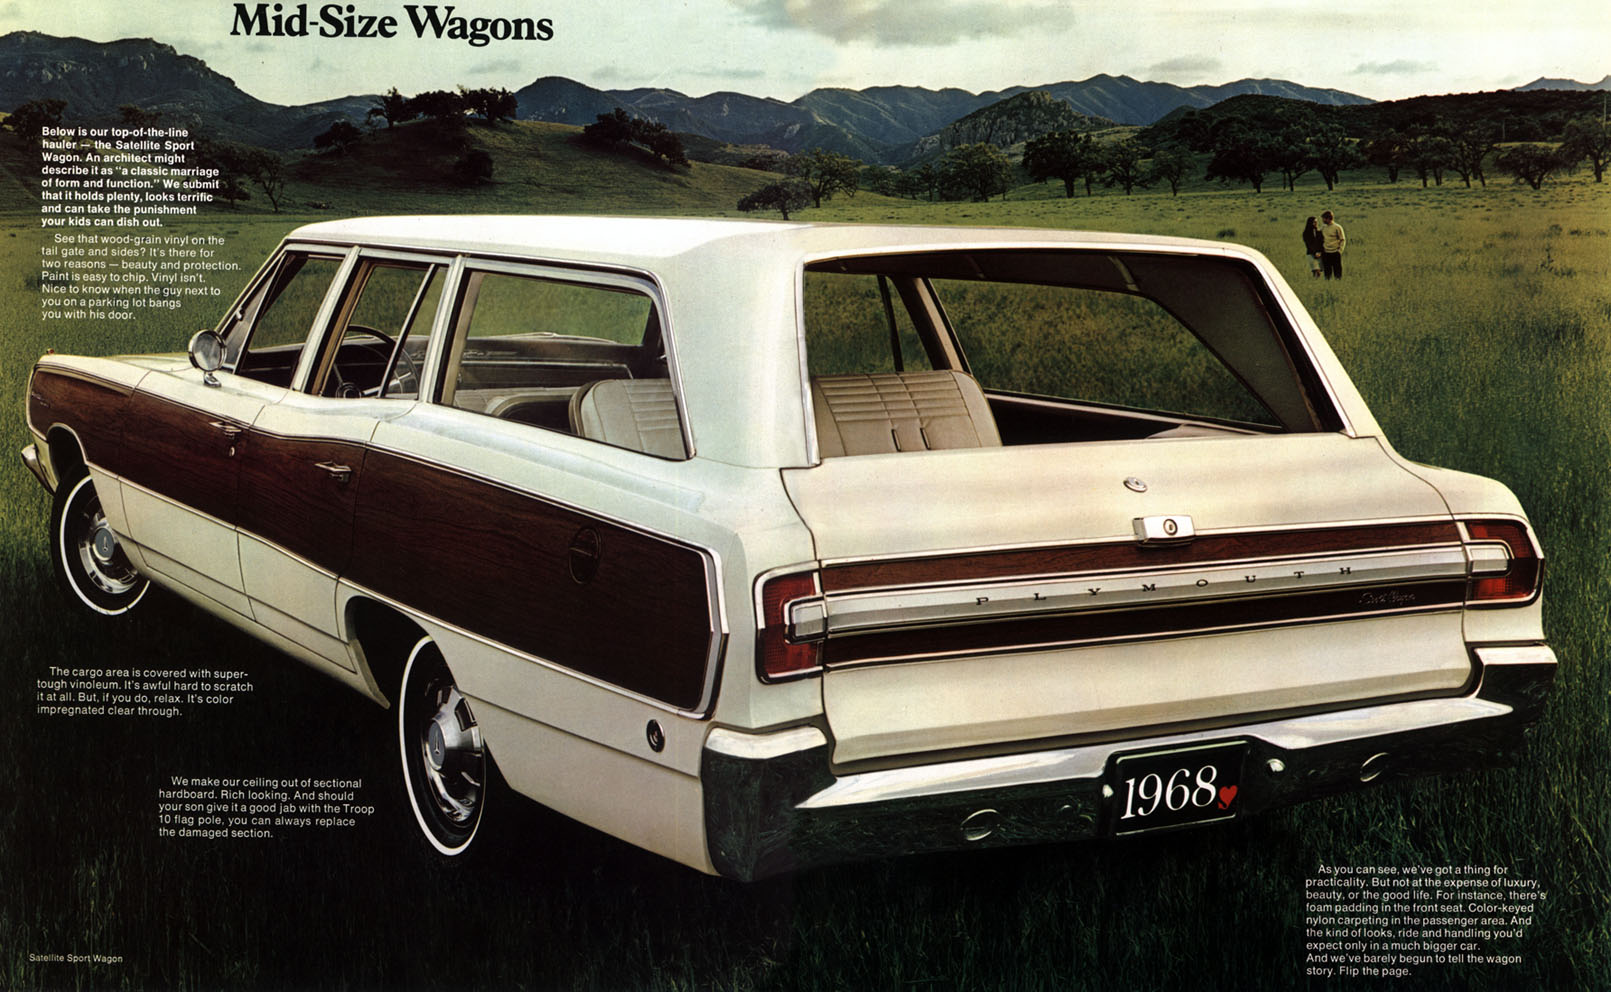 1968_Plymouth_Mid-Size-20-21